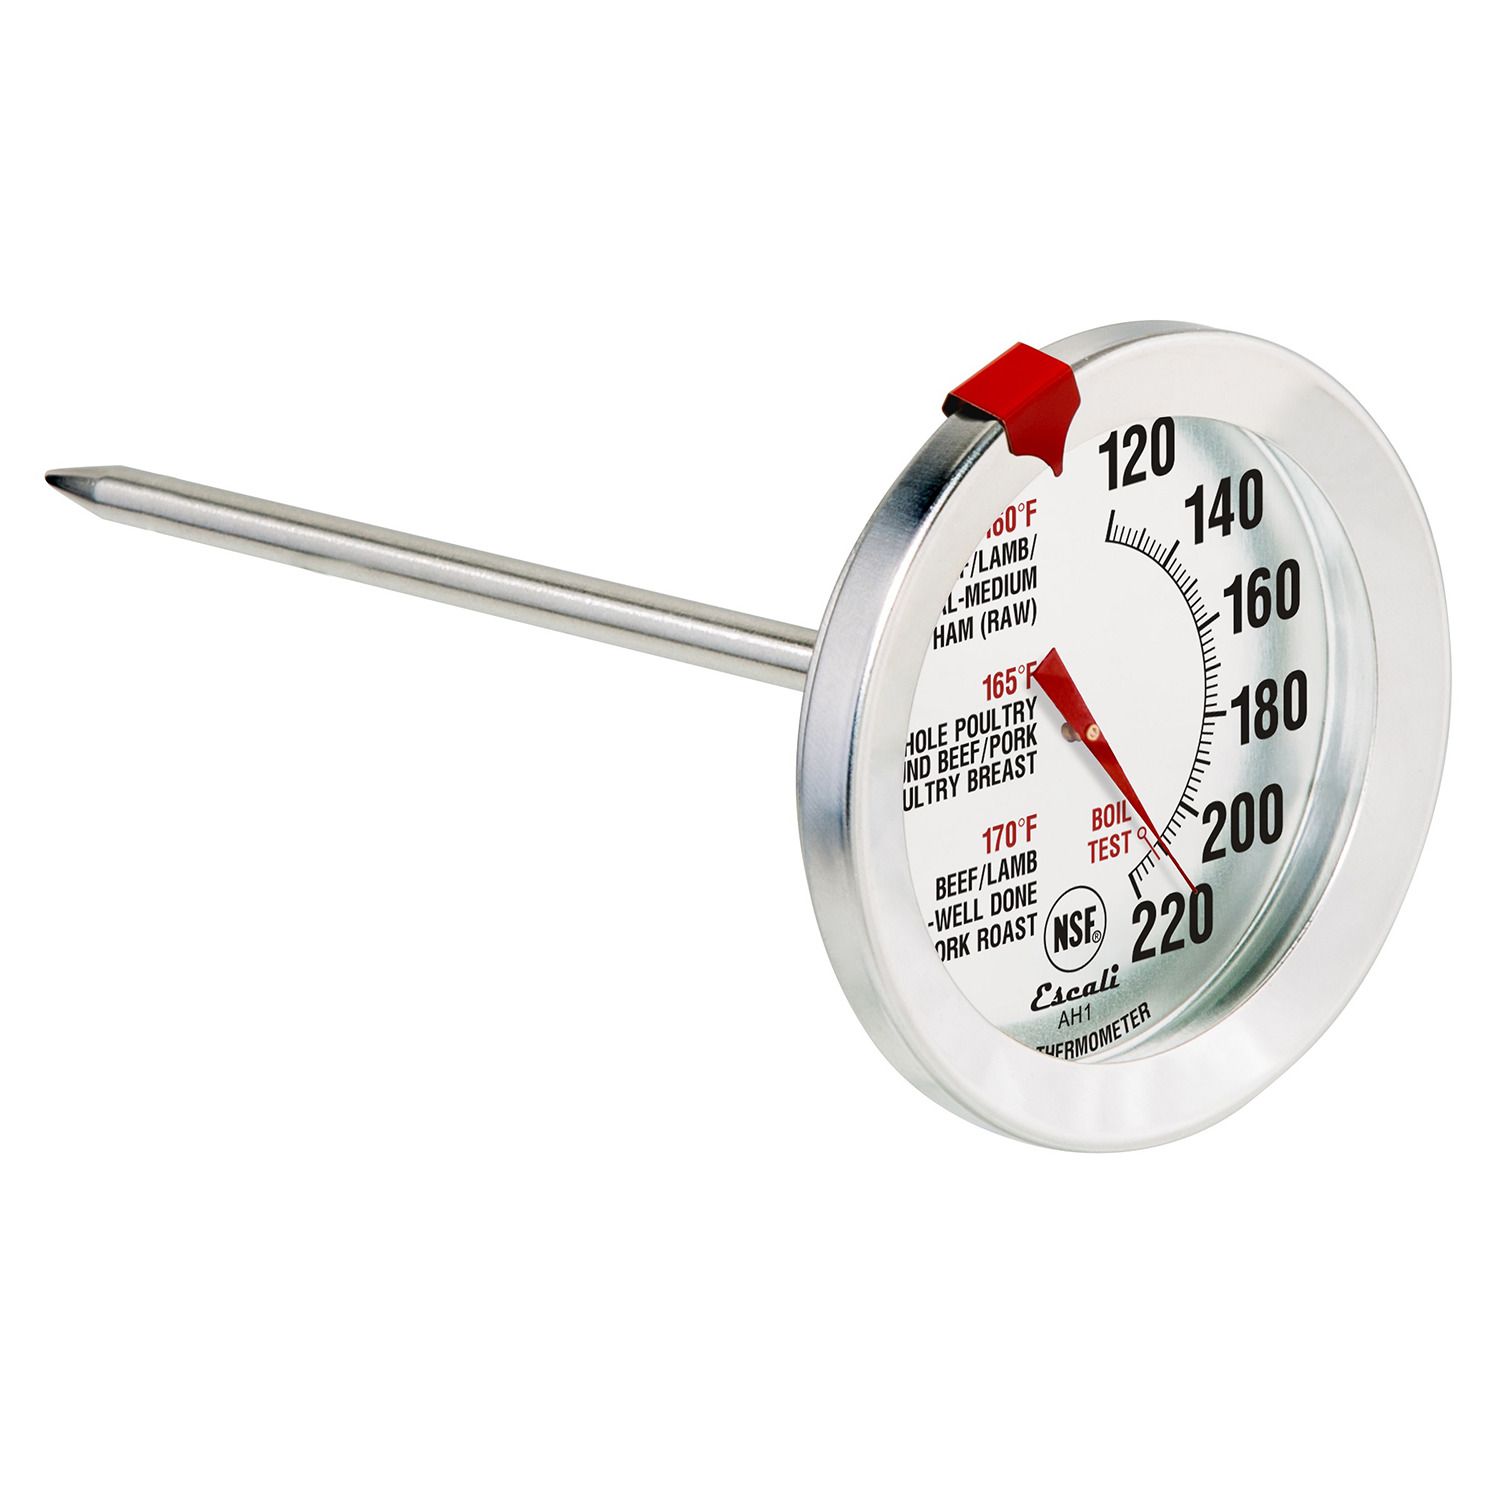 AcuRite Gourmet Oven Thermometer